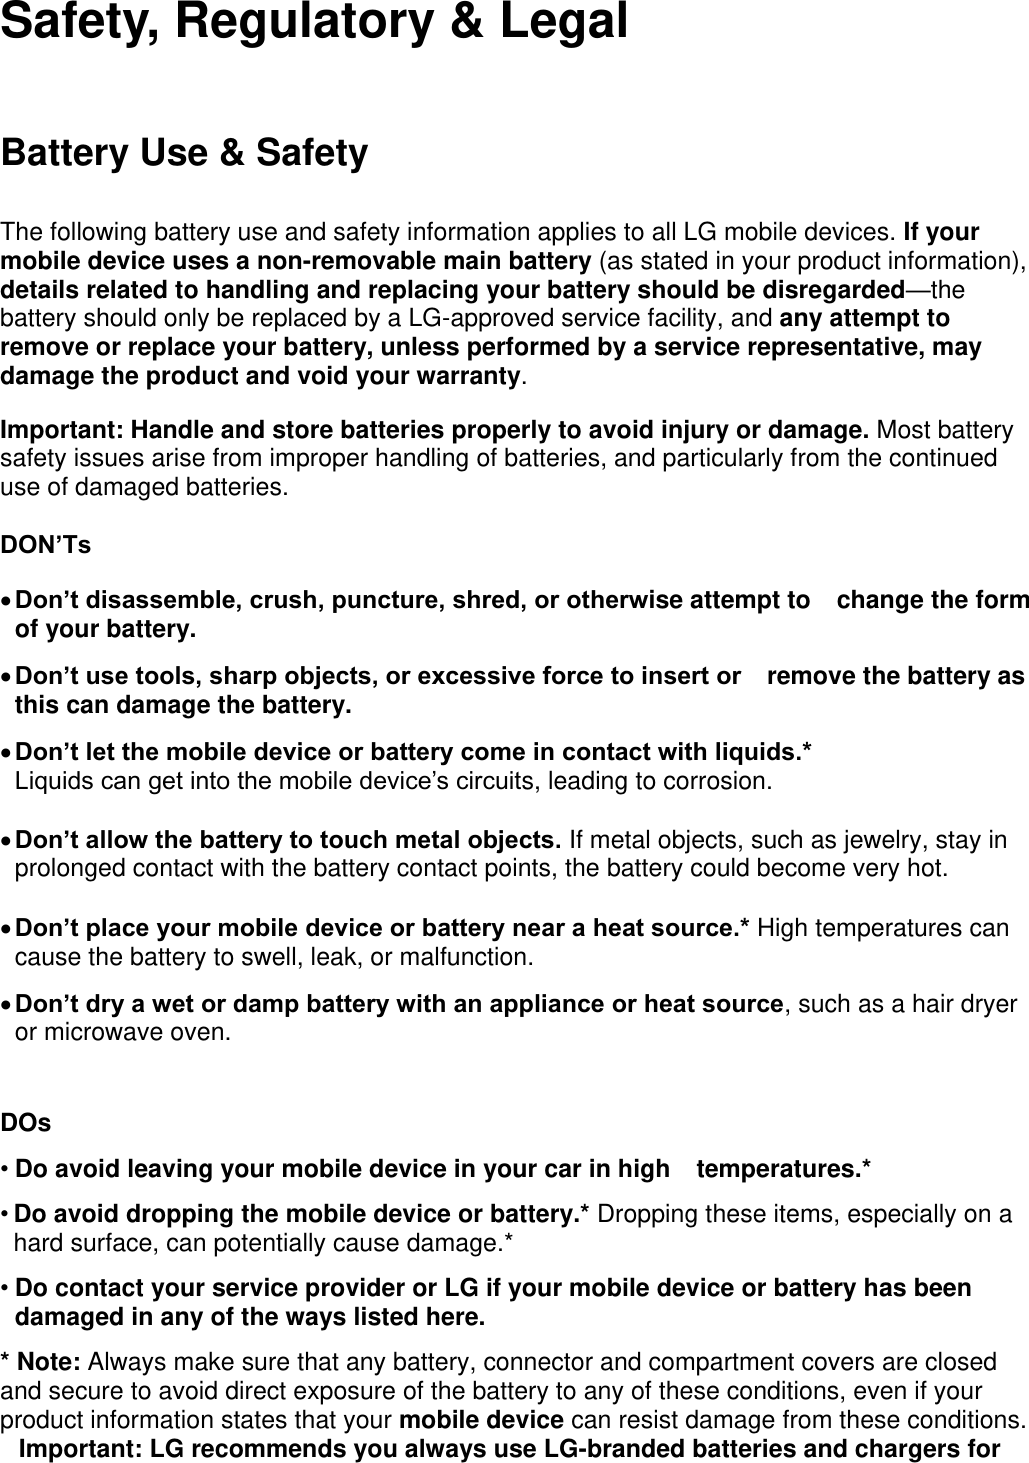 Safety, Regulatory &amp; Legal Battery Use &amp; Safety The following battery use and safety information applies to all LG mobile devices. If your mobile device uses a non-removable main battery (as stated in your product information), details related to handling and replacing your battery should be disregarded—the battery should only be replaced by a LG-approved service facility, and any attempt to remove or replace your battery, unless performed by a service representative, may damage the product and void your warranty. Important: Handle and store batteries properly to avoid injury or damage. Most battery safety issues arise from improper handling of batteries, and particularly from the continued use of damaged batteries.  DON’Ts  Don’t disassemble, crush, puncture, shred, or otherwise attempt to change the form of your battery.    Don’t use tools, sharp objects, or excessive force to insert or remove the battery as this can damage the battery.    Don’t let the mobile device or battery come in contact with liquids.*  Liquids can get into the mobile device’s circuits, leading to corrosion.   Don’t allow the battery to touch metal objects. If metal objects, such as jewelry, stay in prolonged contact with the battery contact points, the battery could become very hot.   Don’t place your mobile device or battery near a heat source.* High temperatures can cause the battery to swell, leak, or malfunction.    Don’t dry a wet or damp battery with an appliance or heat source, such as a hair dryer or microwave oven.  DOs   • Do avoid leaving your mobile device in your car in high temperatures.* • Do avoid dropping the mobile device or battery.* Dropping these items, especially on a hard surface, can potentially cause damage.* • Do contact your service provider or LG if your mobile device or battery has been damaged in any of the ways listed here.  * Note: Always make sure that any battery, connector and compartment covers are closed and secure to avoid direct exposure of the battery to any of these conditions, even if your product information states that your mobile device can resist damage from these conditions. Important: LG recommends you always use LG-branded batteries and chargers for 